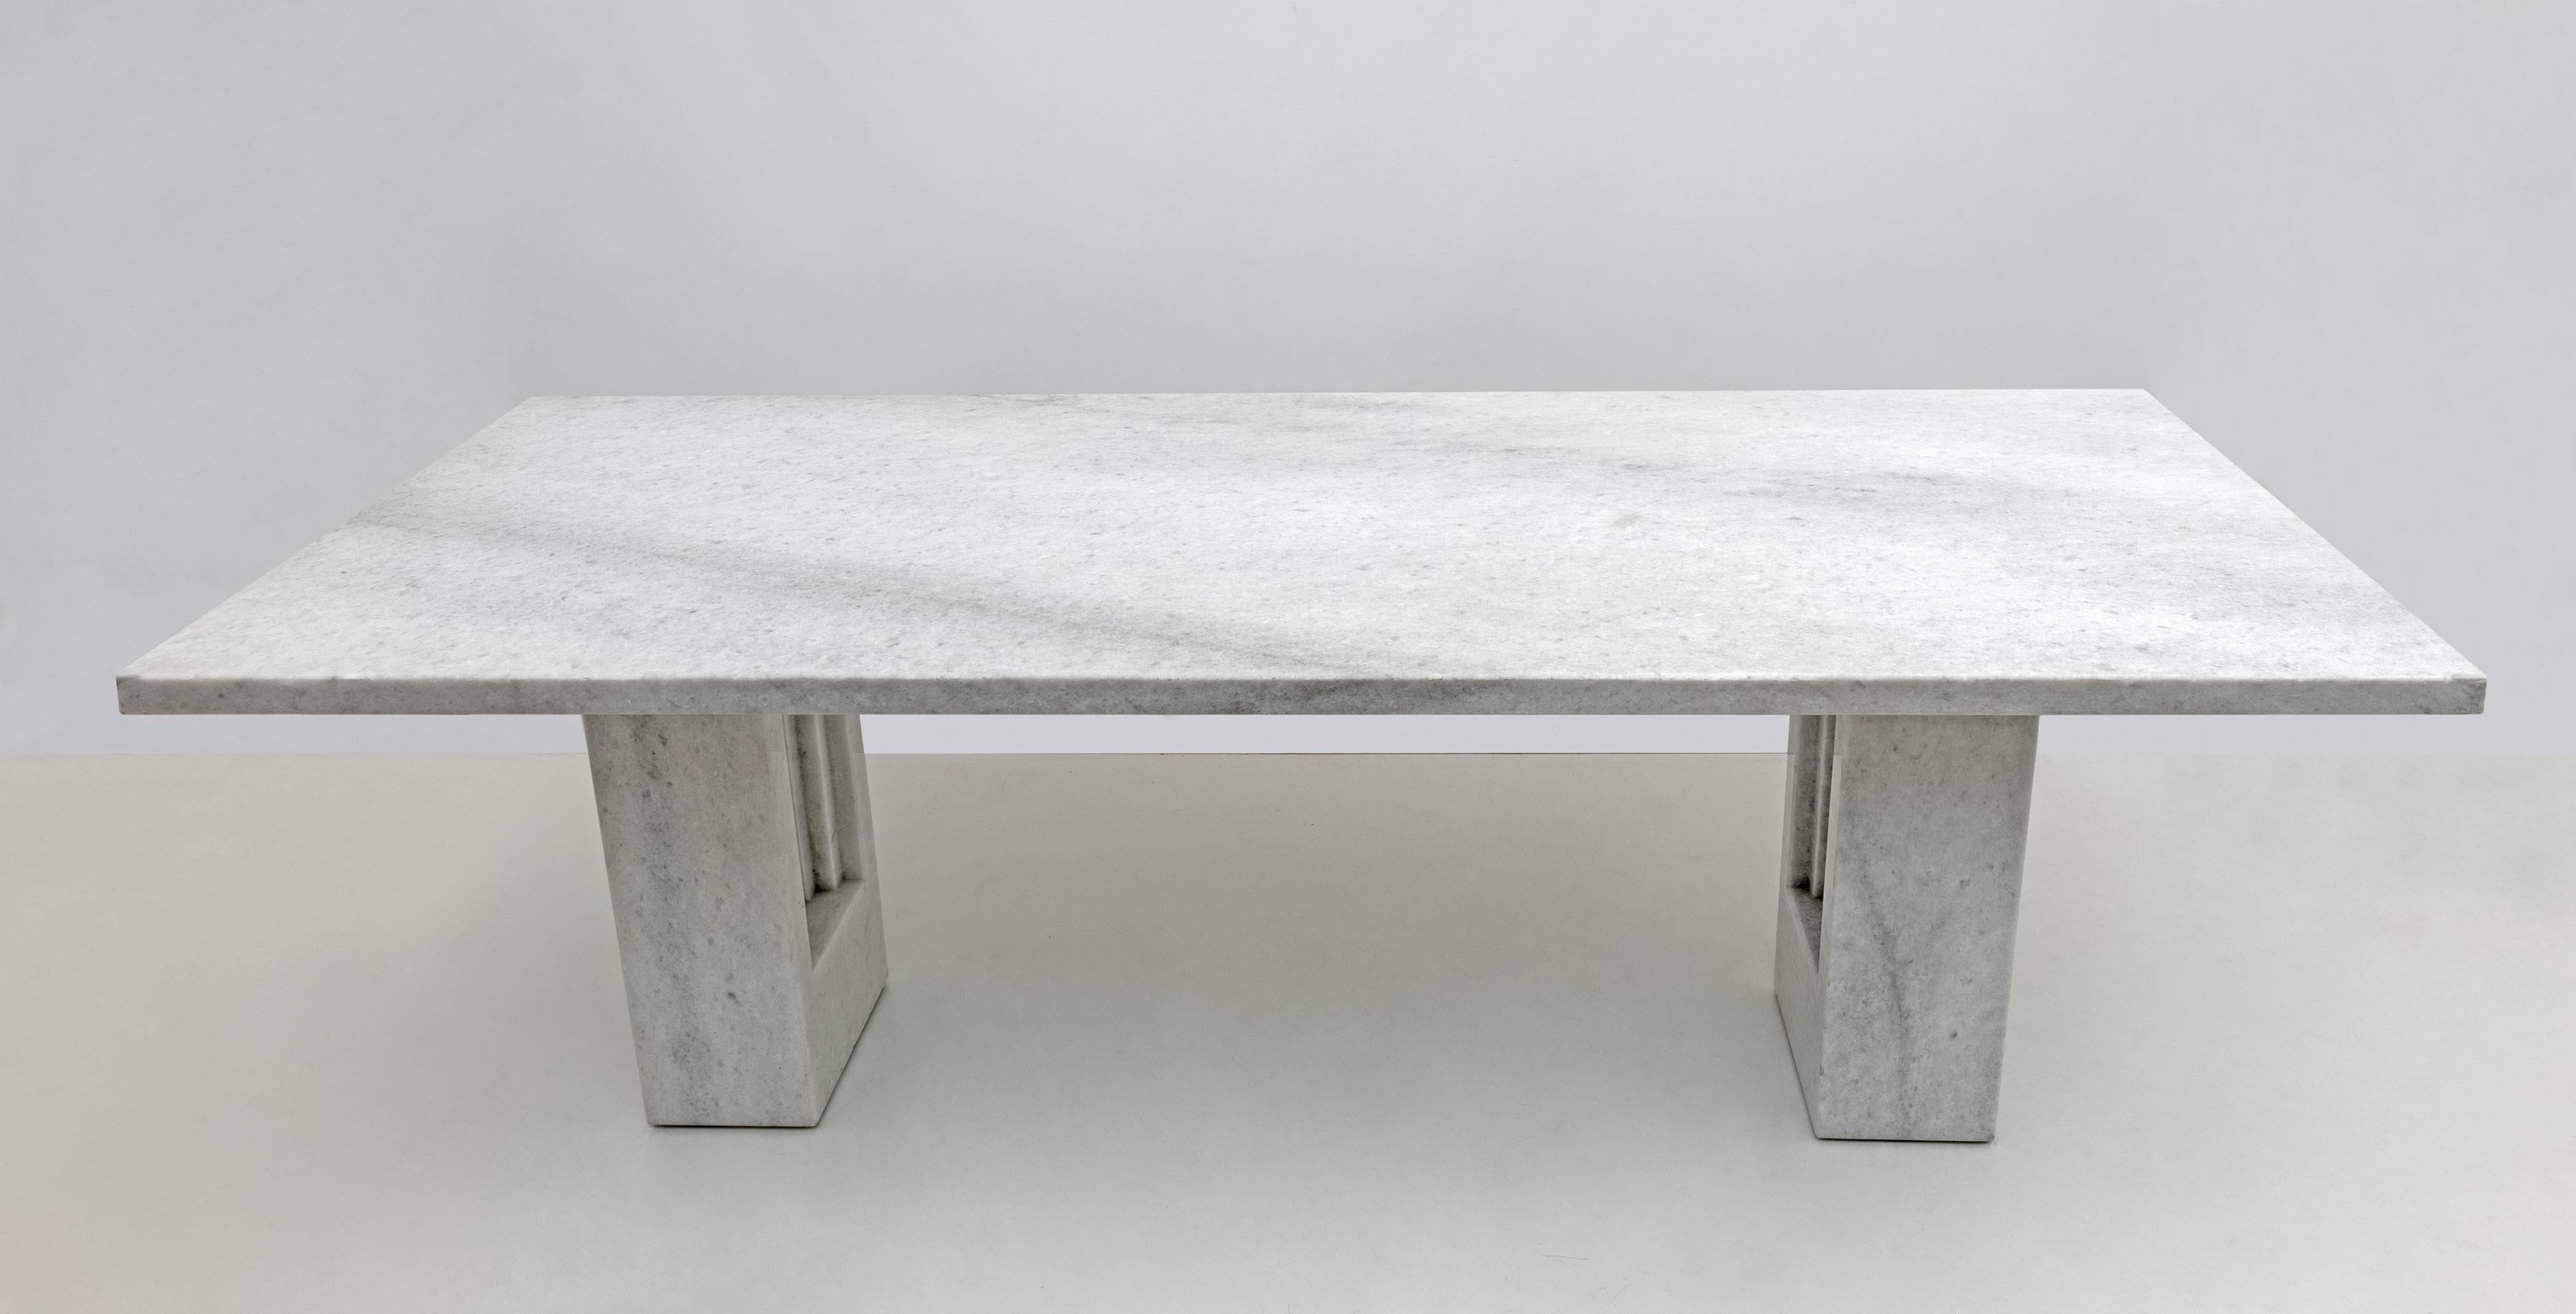 Original Delfi table in excellent condition.

Produced by Gavina, Italy

Designed by Carlo Scarpa and Marcel Breuer

This particular table is made of a rare Bianco Cristallino marble with silver flakes (See featured image)
As far as we know this is